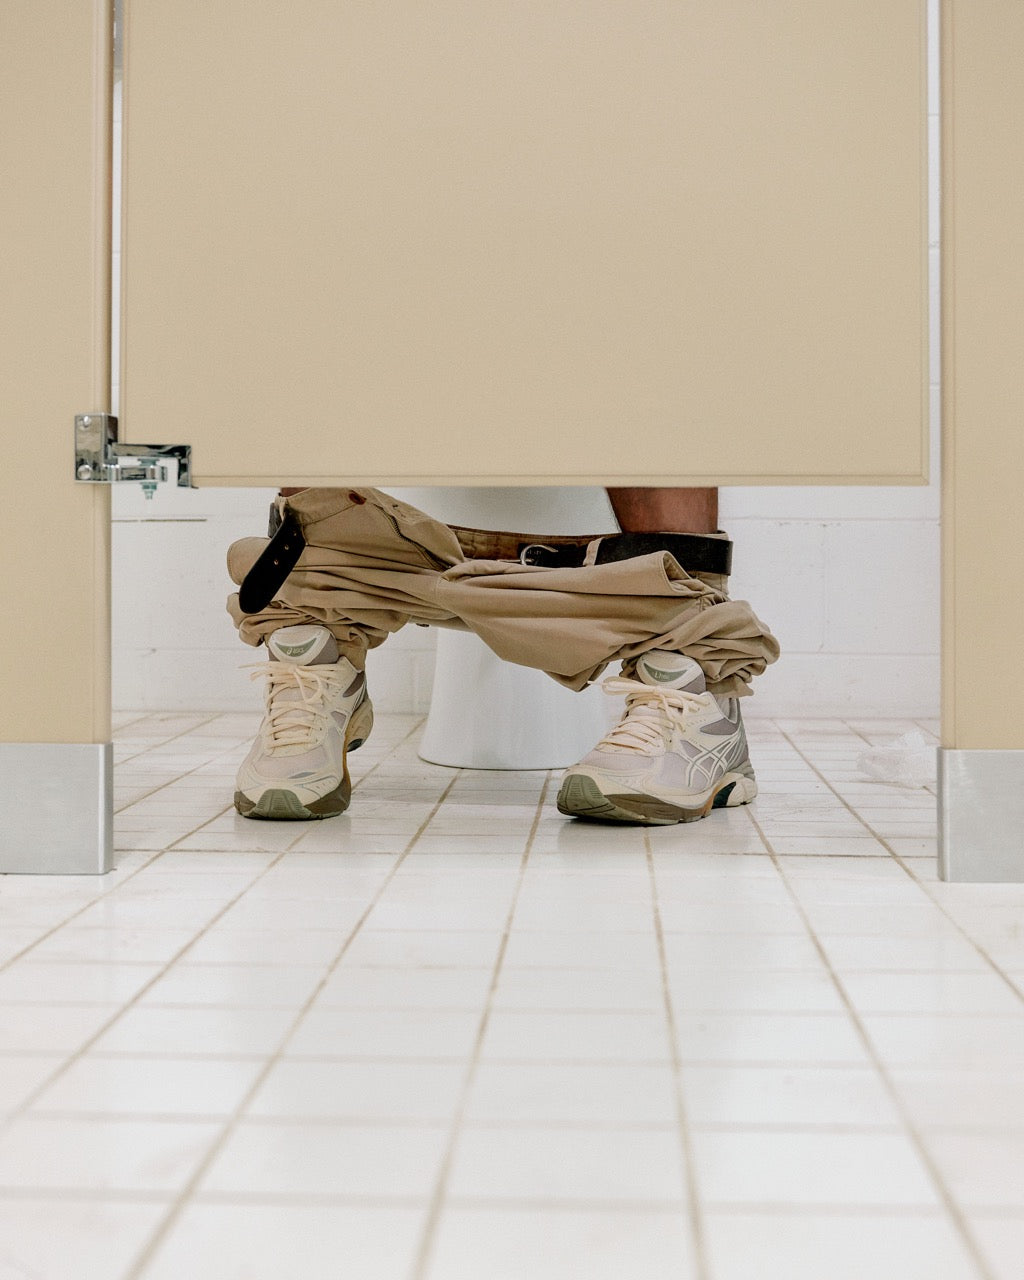 Unique perspective photo featuring a person sitting in a bathroom stall, pants lowered to ankles, with Dime x ASICS GT-2160 sneakers prominently displayed, underscoring their everyday usability and distinct style.